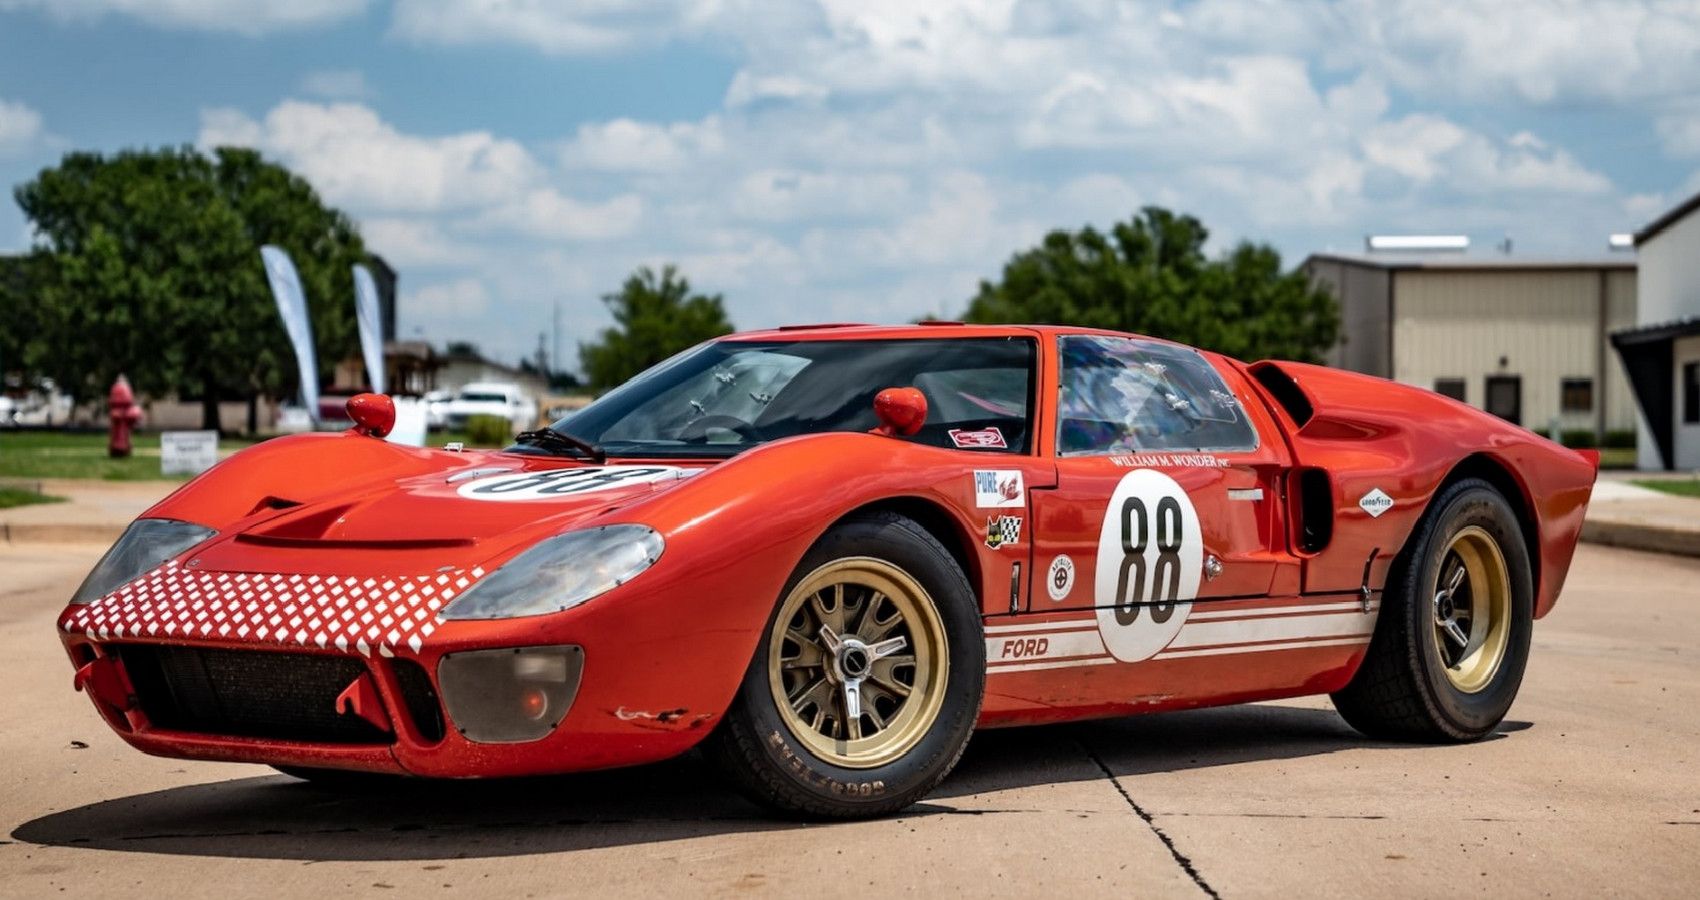 These Are The Coolest Replica Kit Cars On The Market Right Now